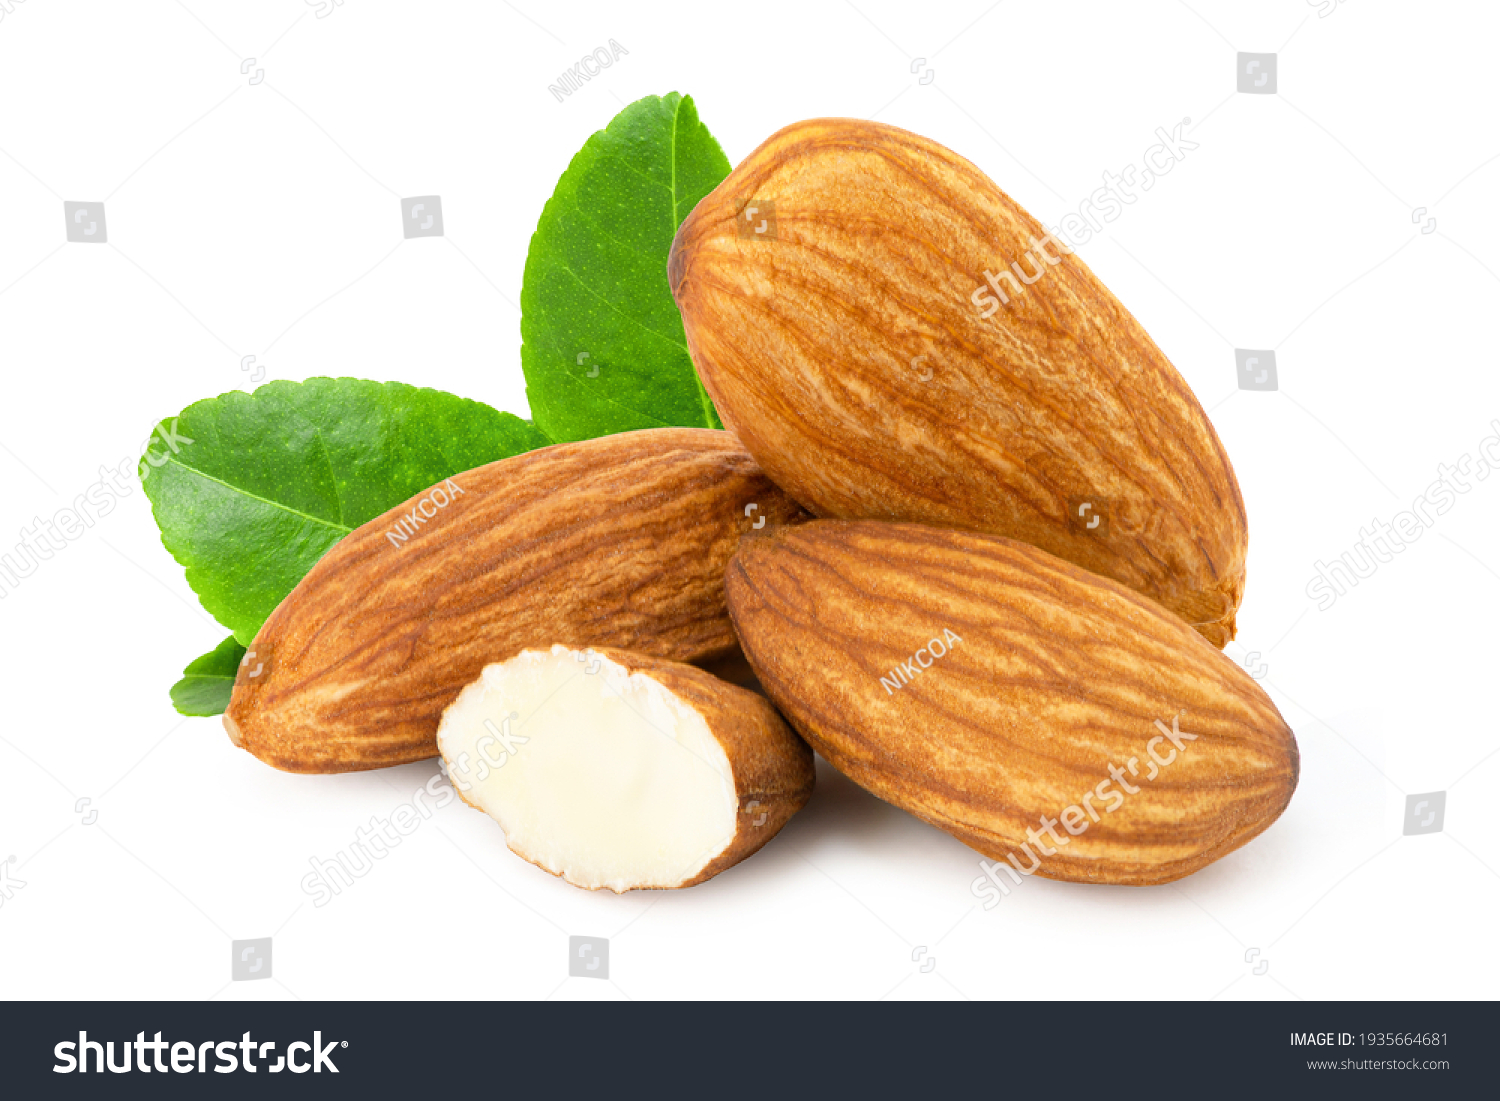 Pile of almond nuts and almond slice with green leaf isolated on white background. #1935664681